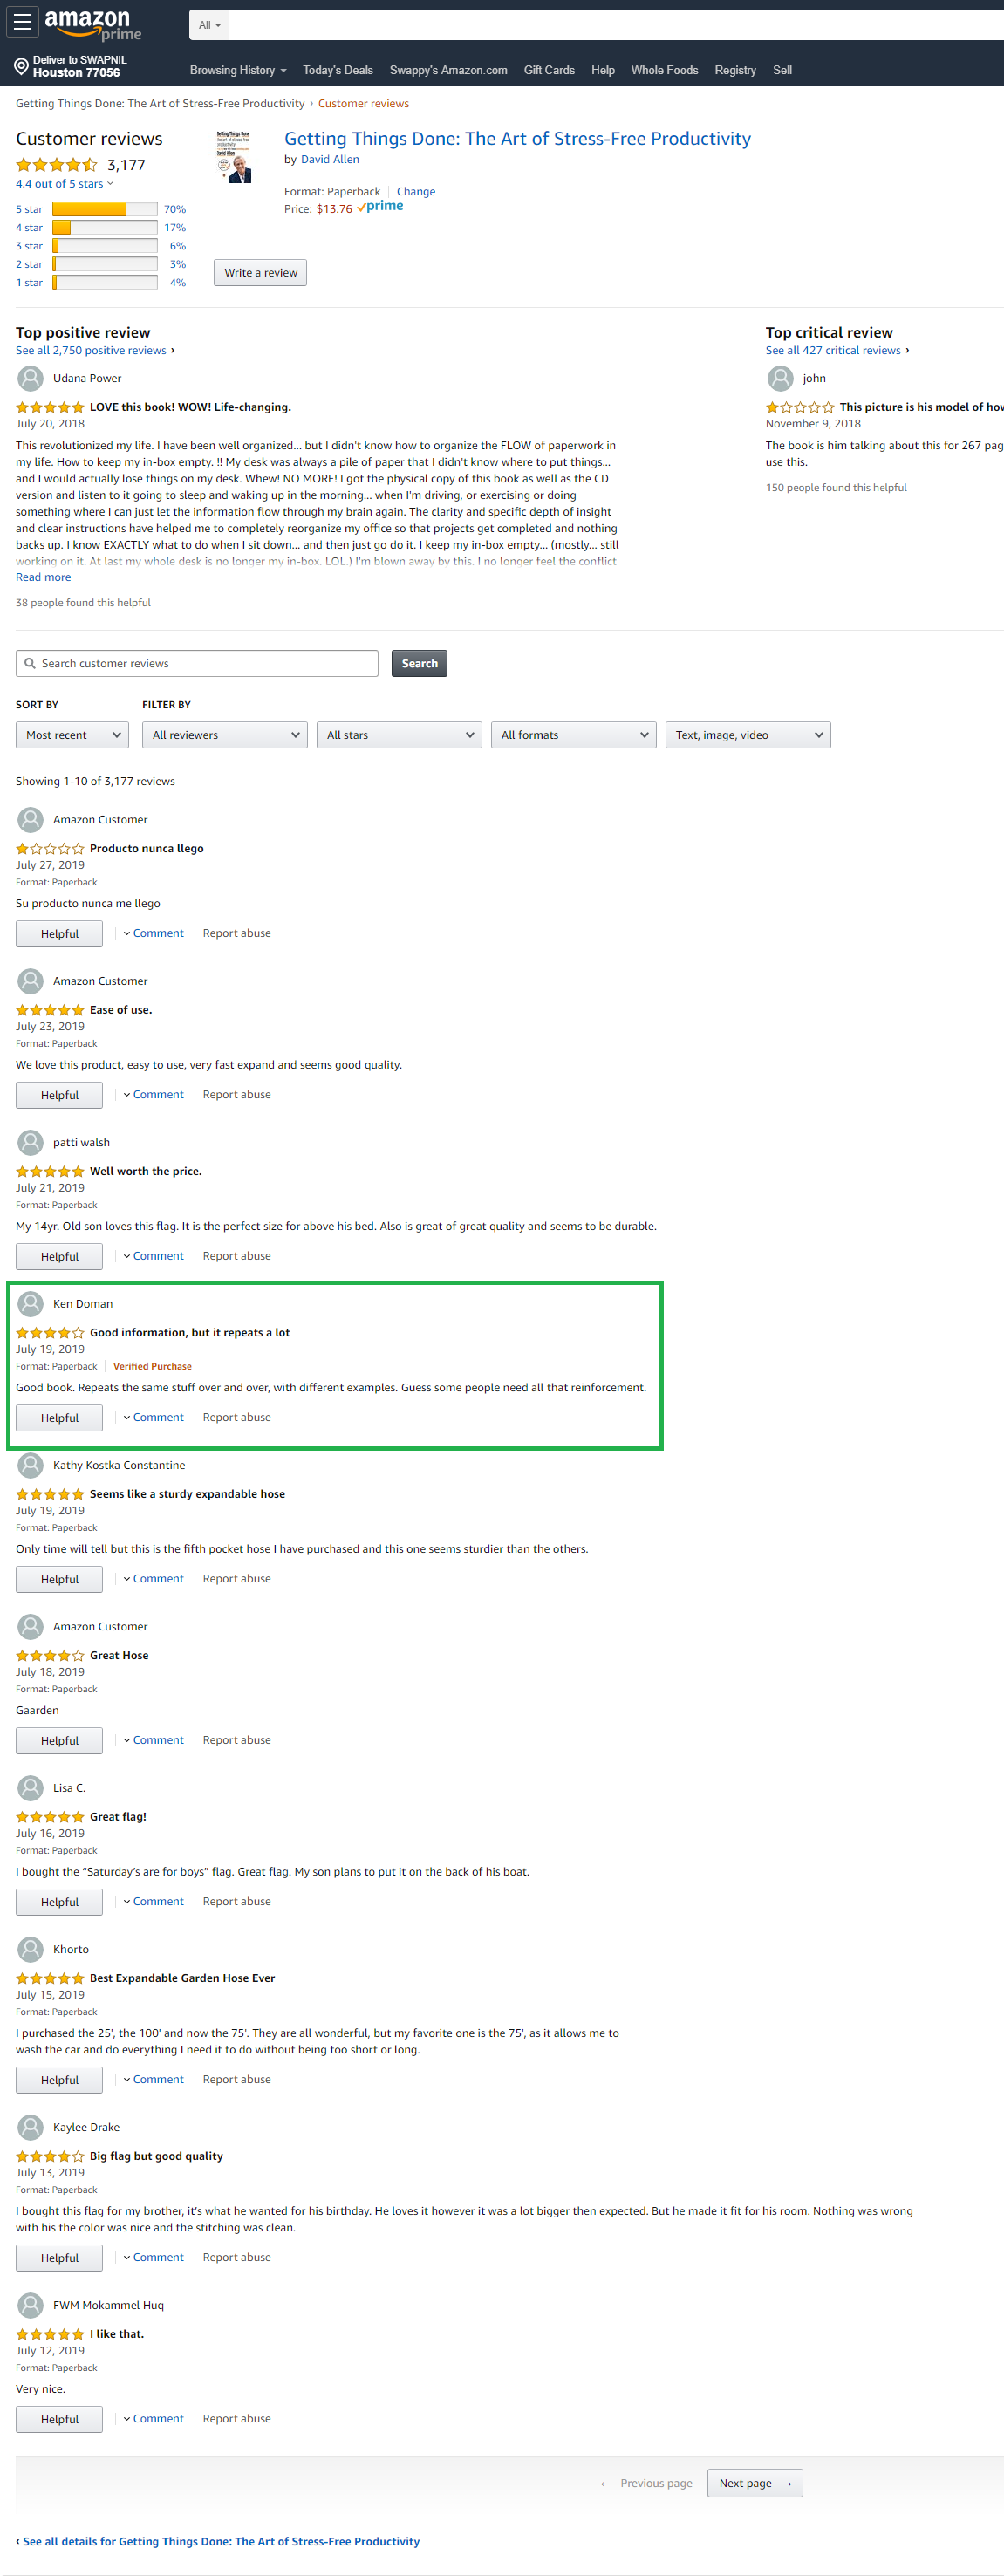 Recent reviews as of 07/27 morning